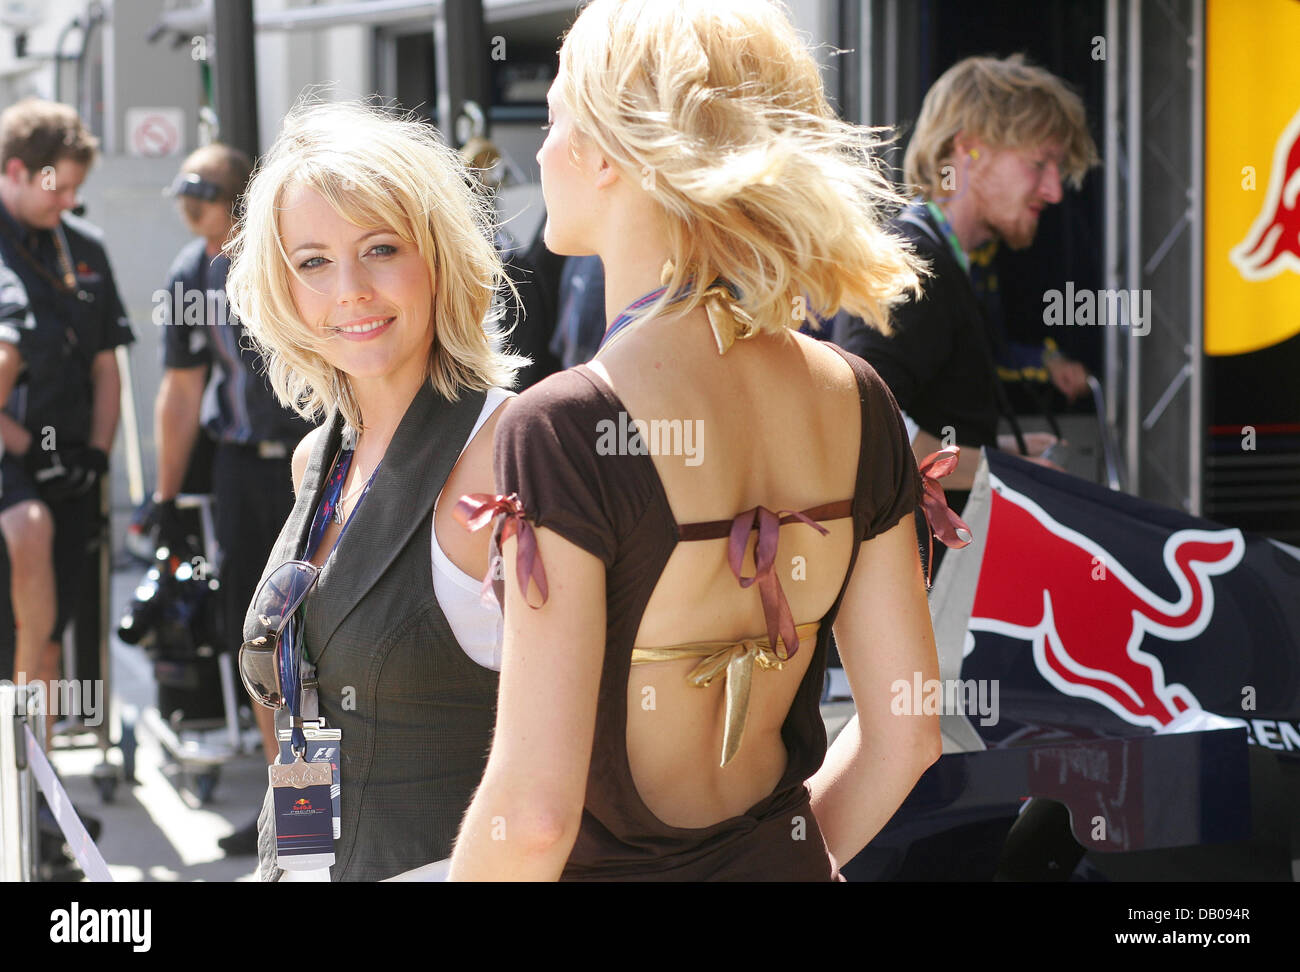 Grid girls pictured in the pit lane during Practice 2 at the Nurburgring, Germany, 20 July 2007. The 2007 Formula 1 Grand Prix of Europe that is held on 22 July. Photo: Gero Breloer Stock Photo